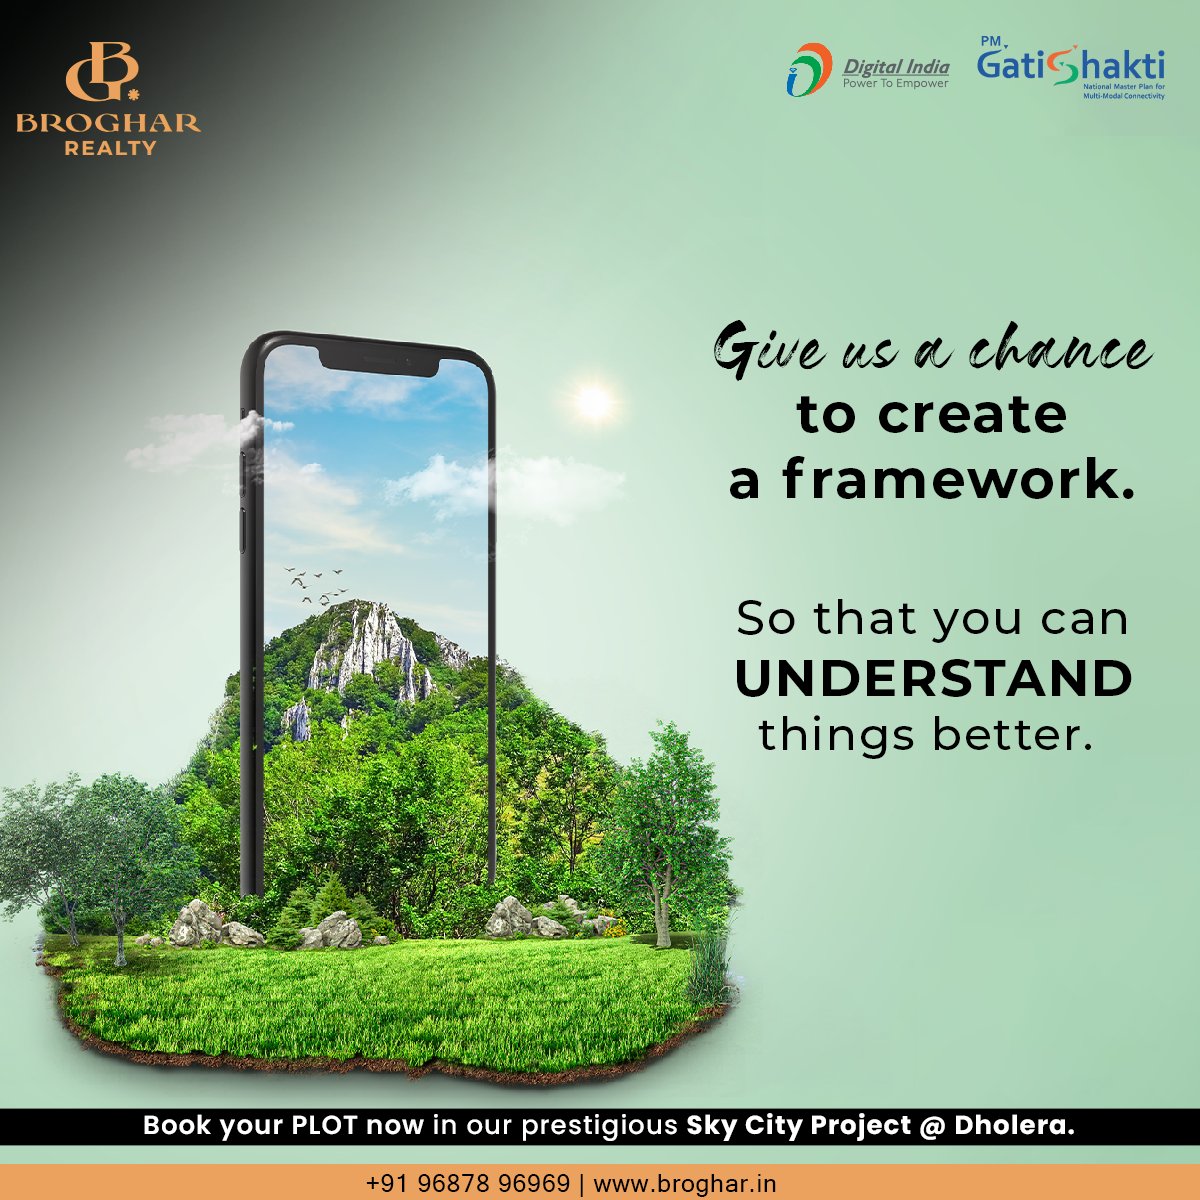 Just come to us with your investing mindset. We will tell you where to invest that investment strategically.

If you have Broghar Realty then all other concerns will not bother you.

#broghar #brogharrealty #dholera #investment #dholerasir #invest #DholeraSmartCity #returns